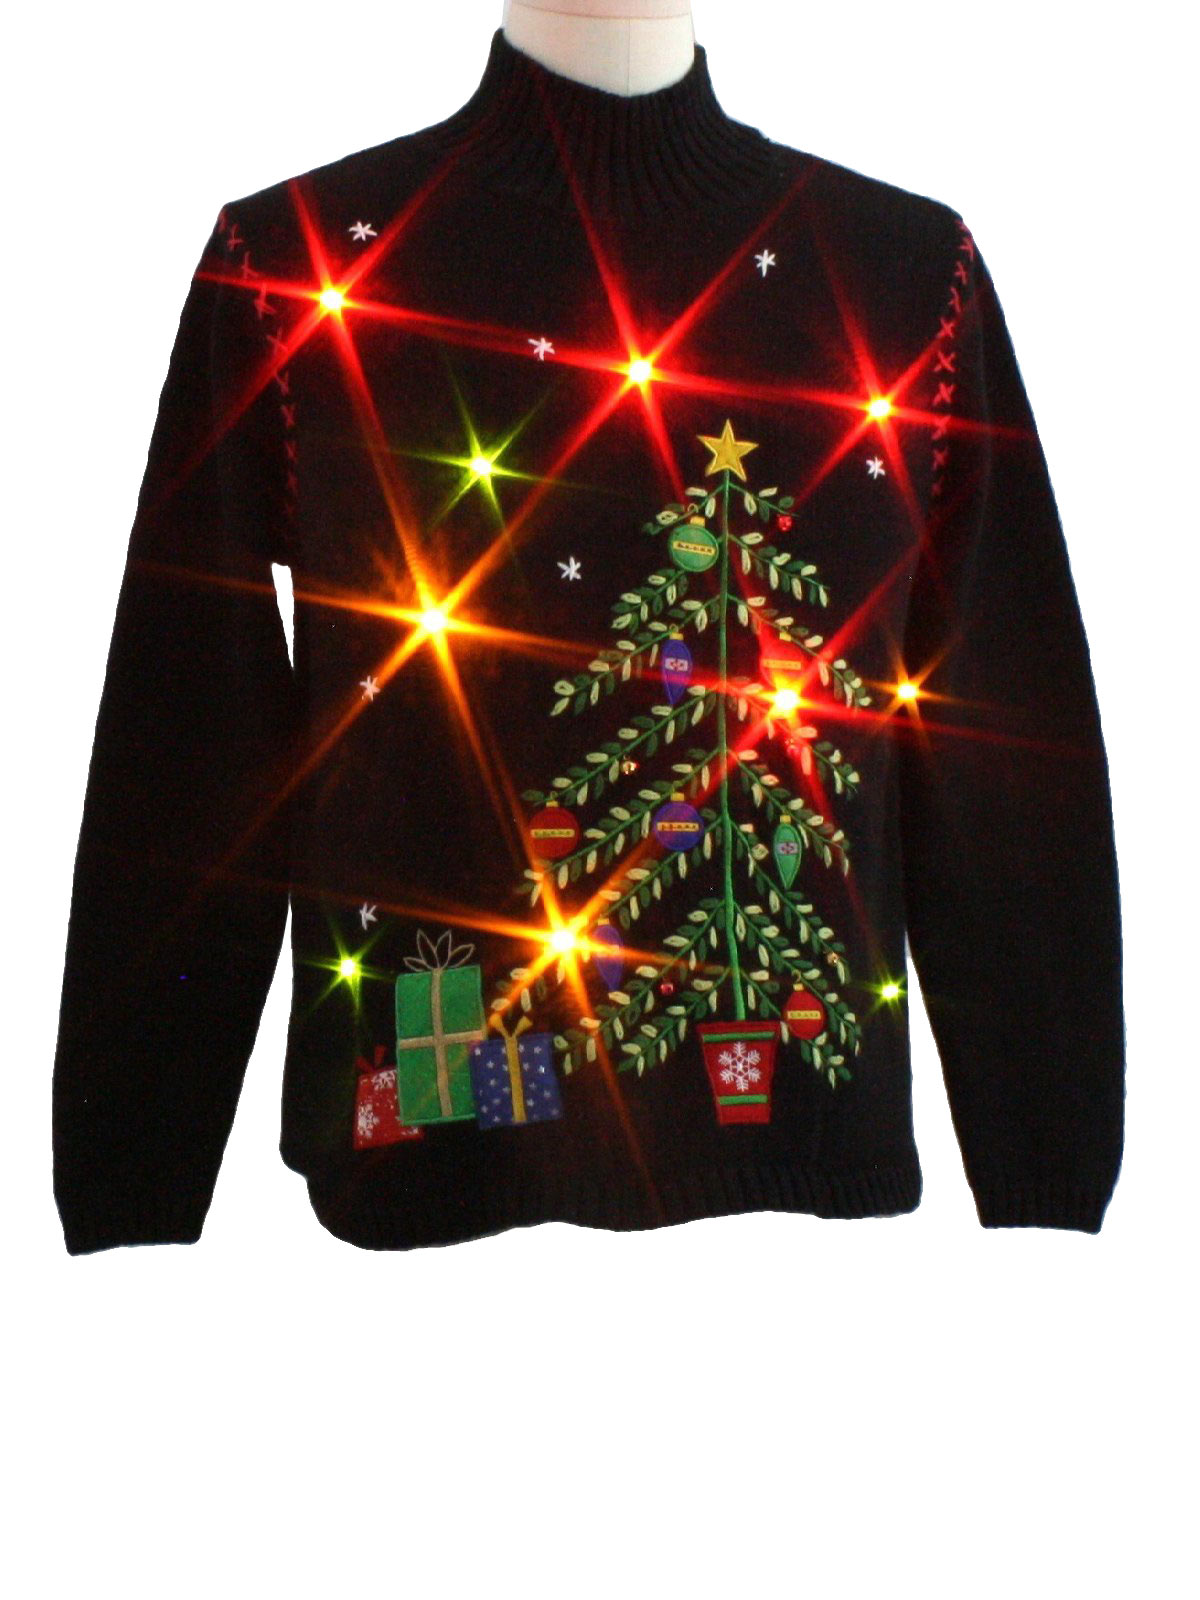 Womens Lightup Ugly Christmas Sweater : -Classic Elements- Womens black ...